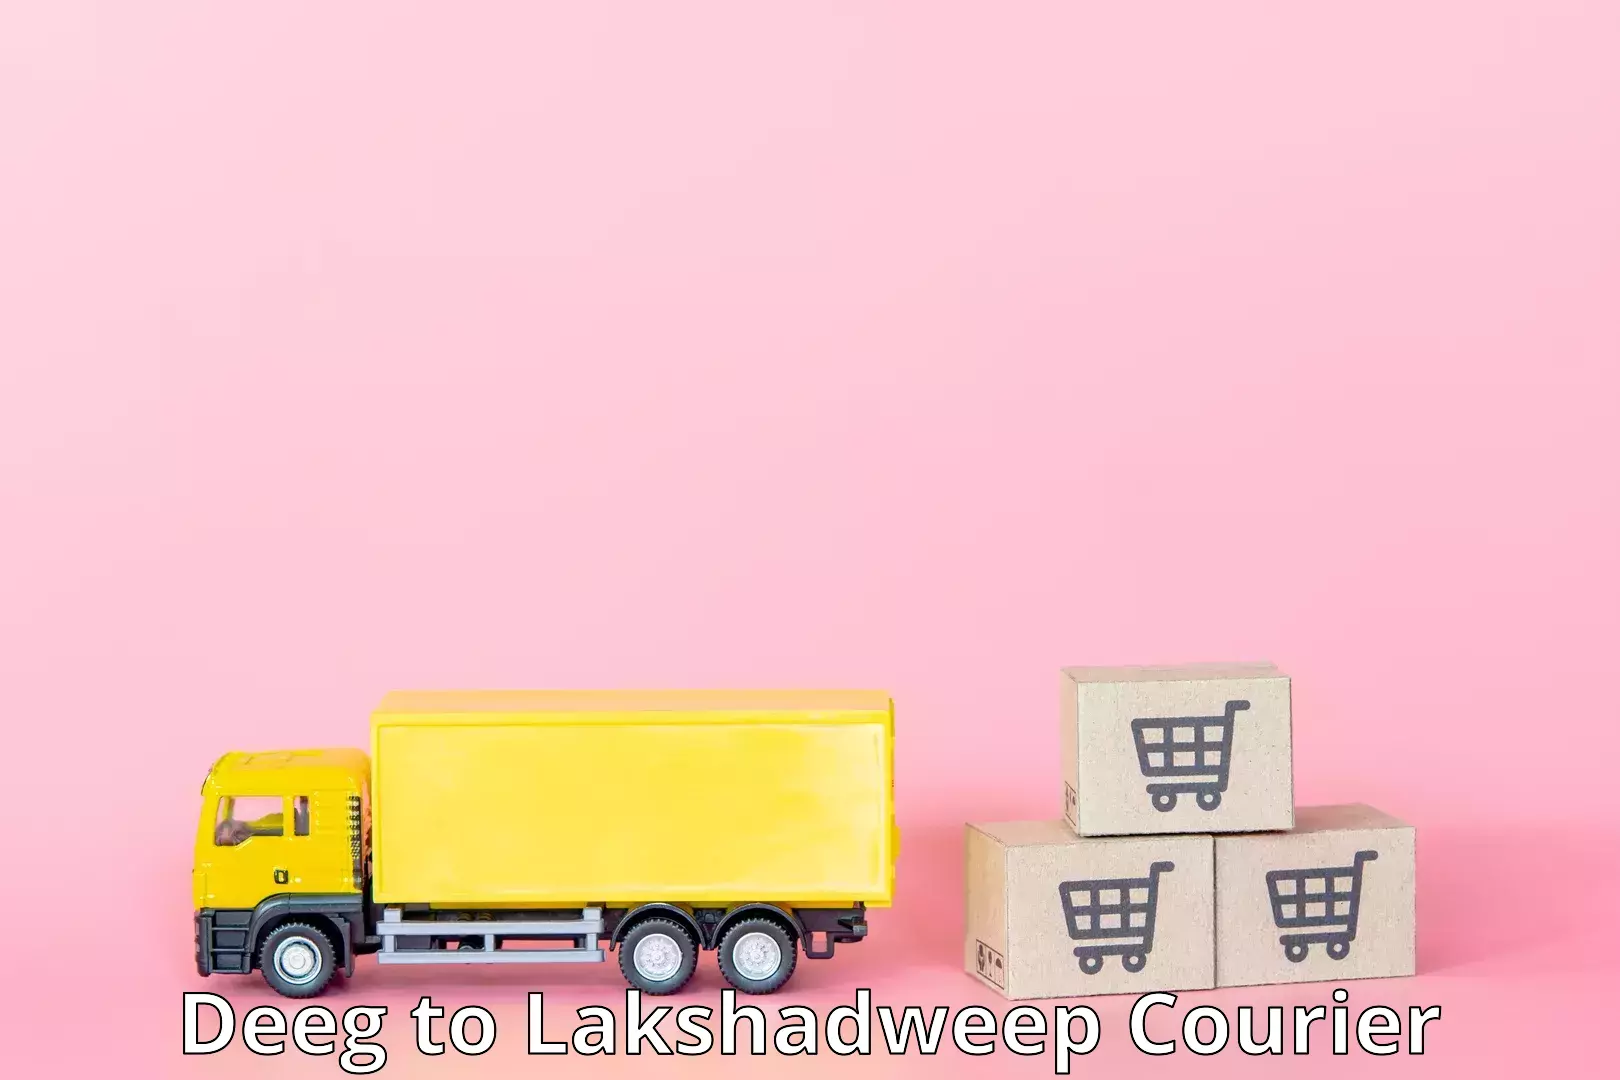 Premium courier services Deeg to Lakshadweep